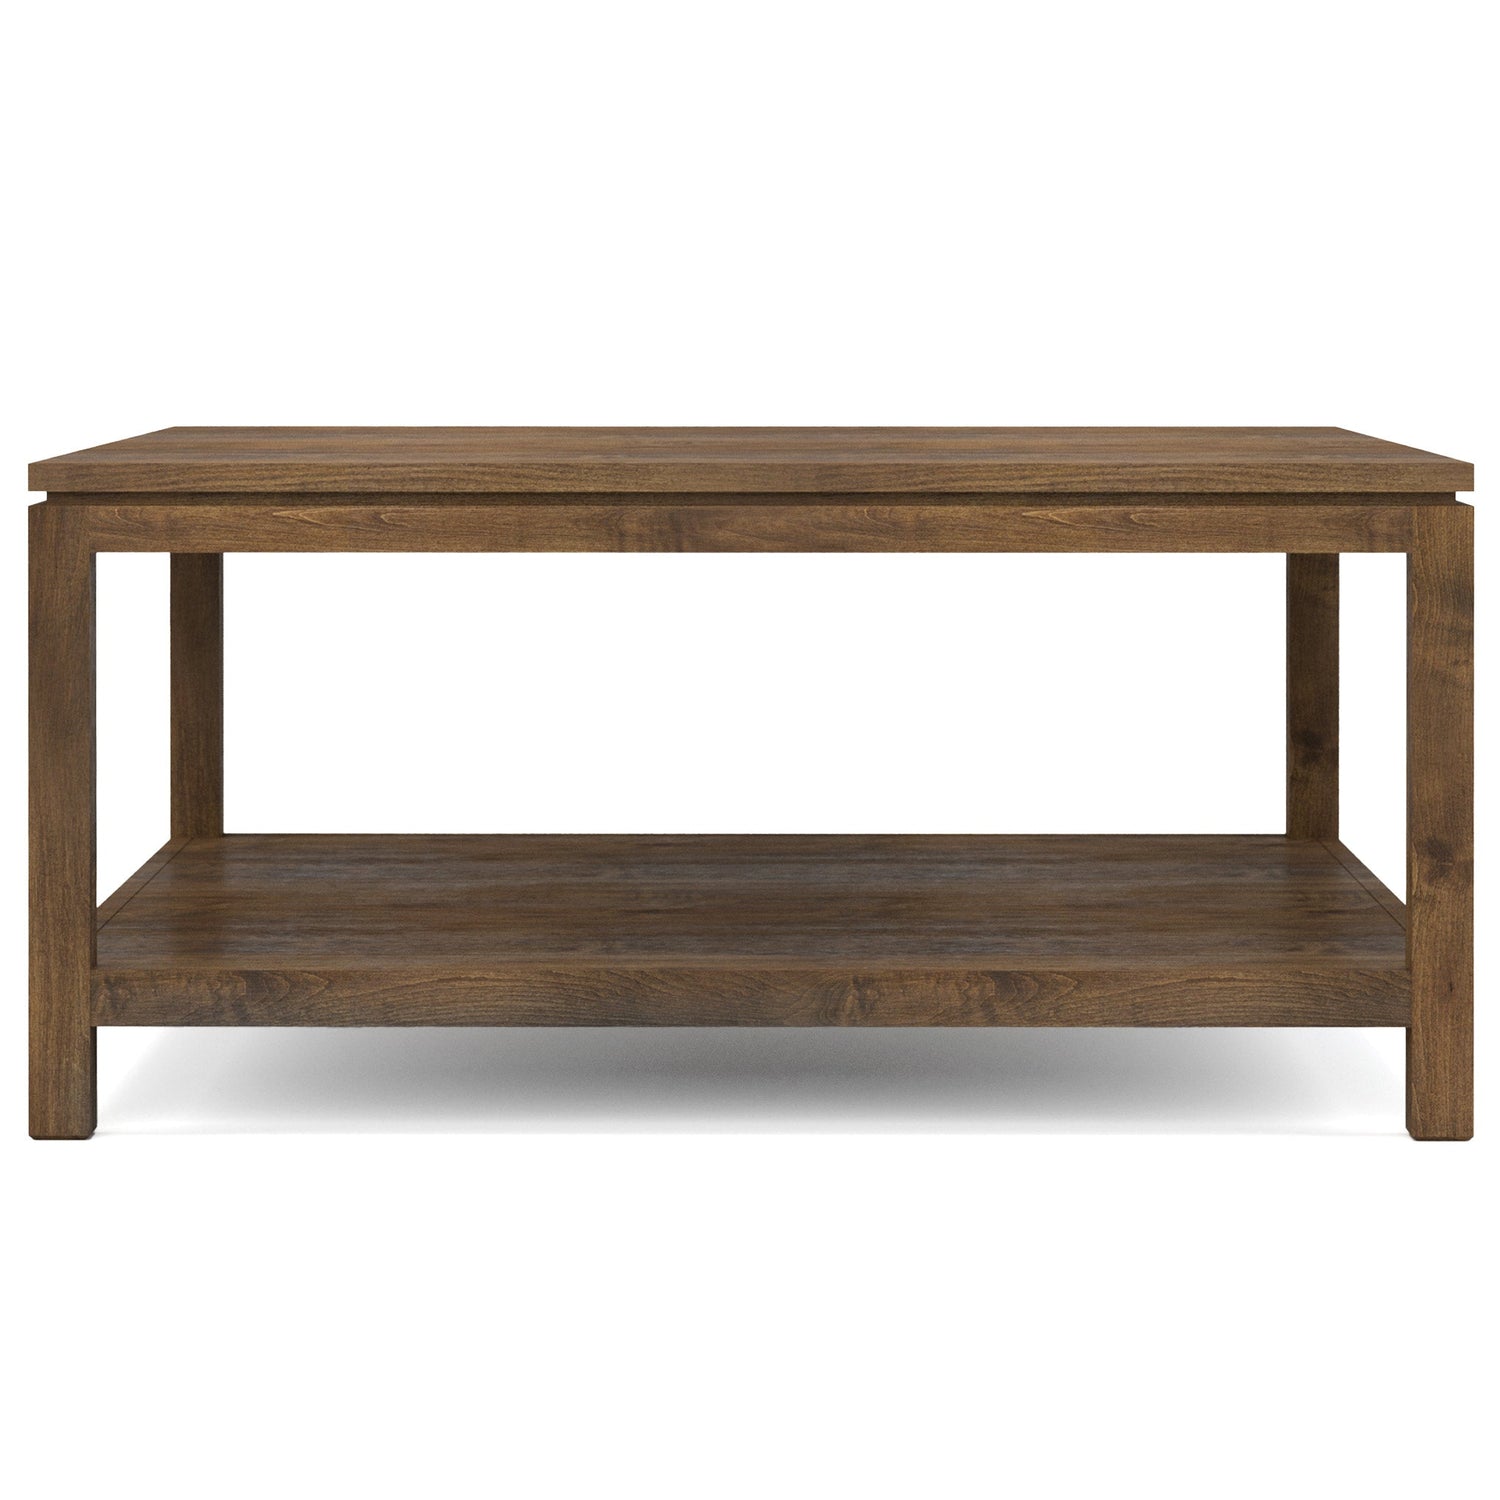 Dwyer Square Coffee Table